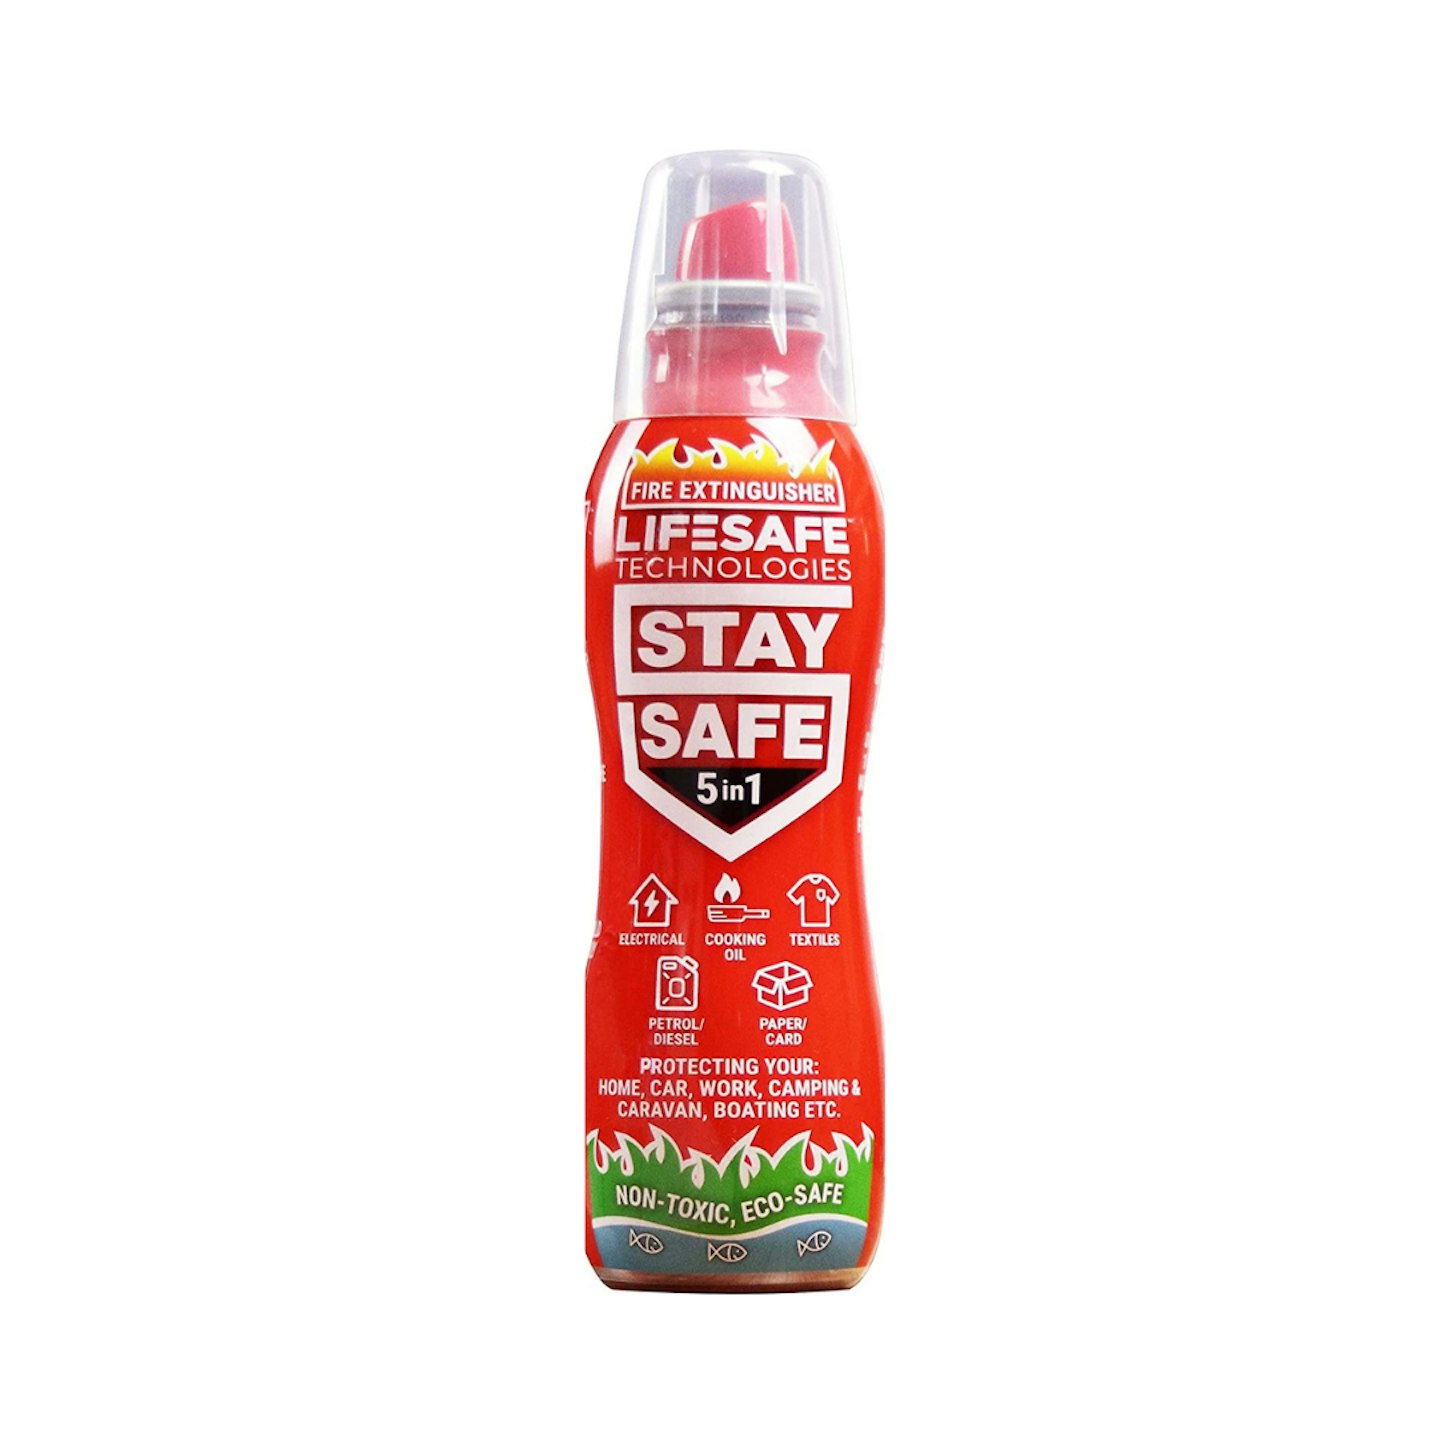 Staysafe 5 in 1 fire extinguisher for cars